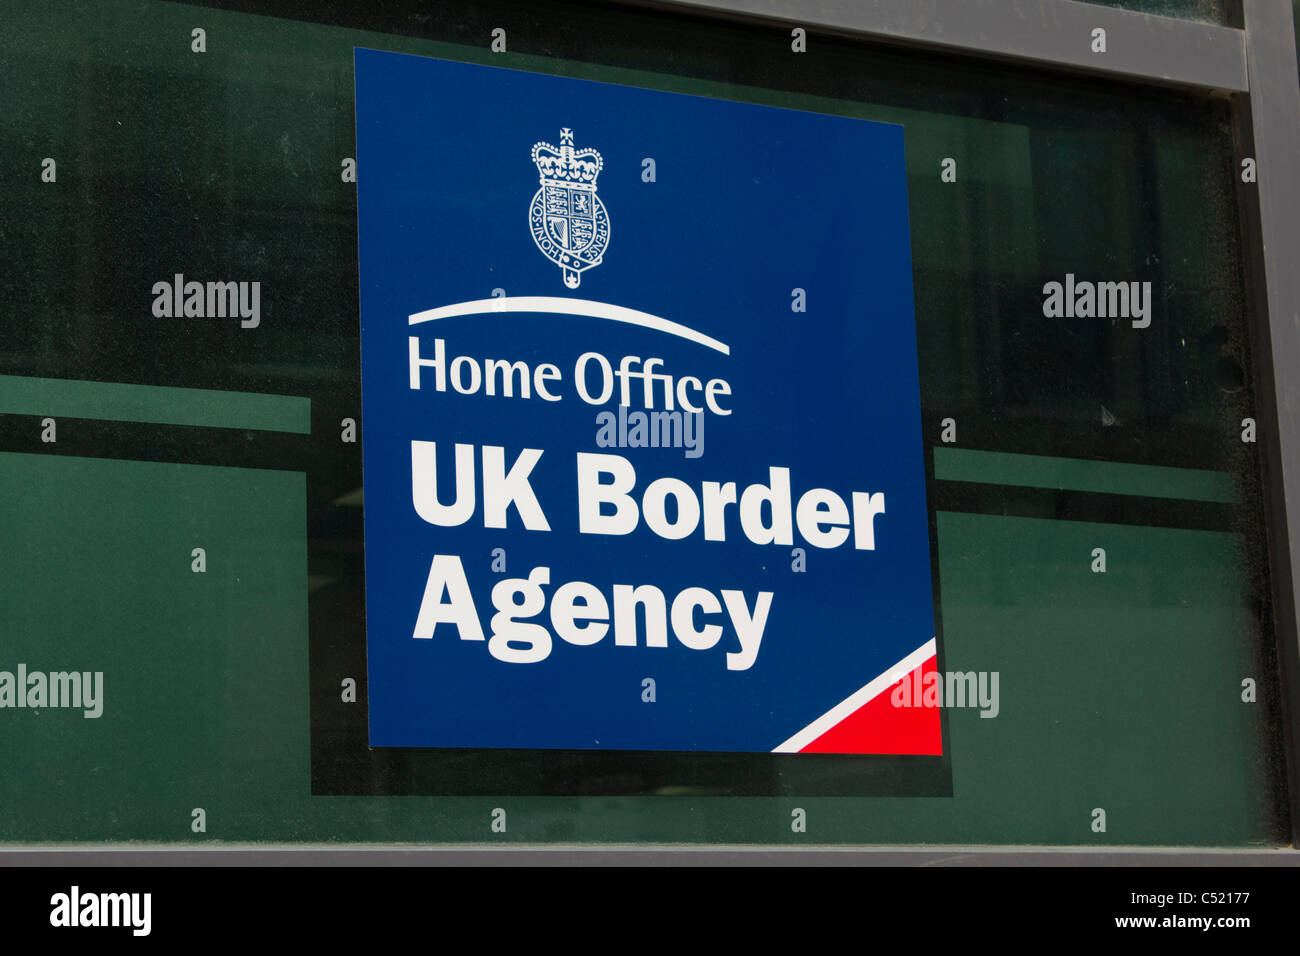 The logo of the Home Office UK Border Agency, Liverpool, England Stock Photo